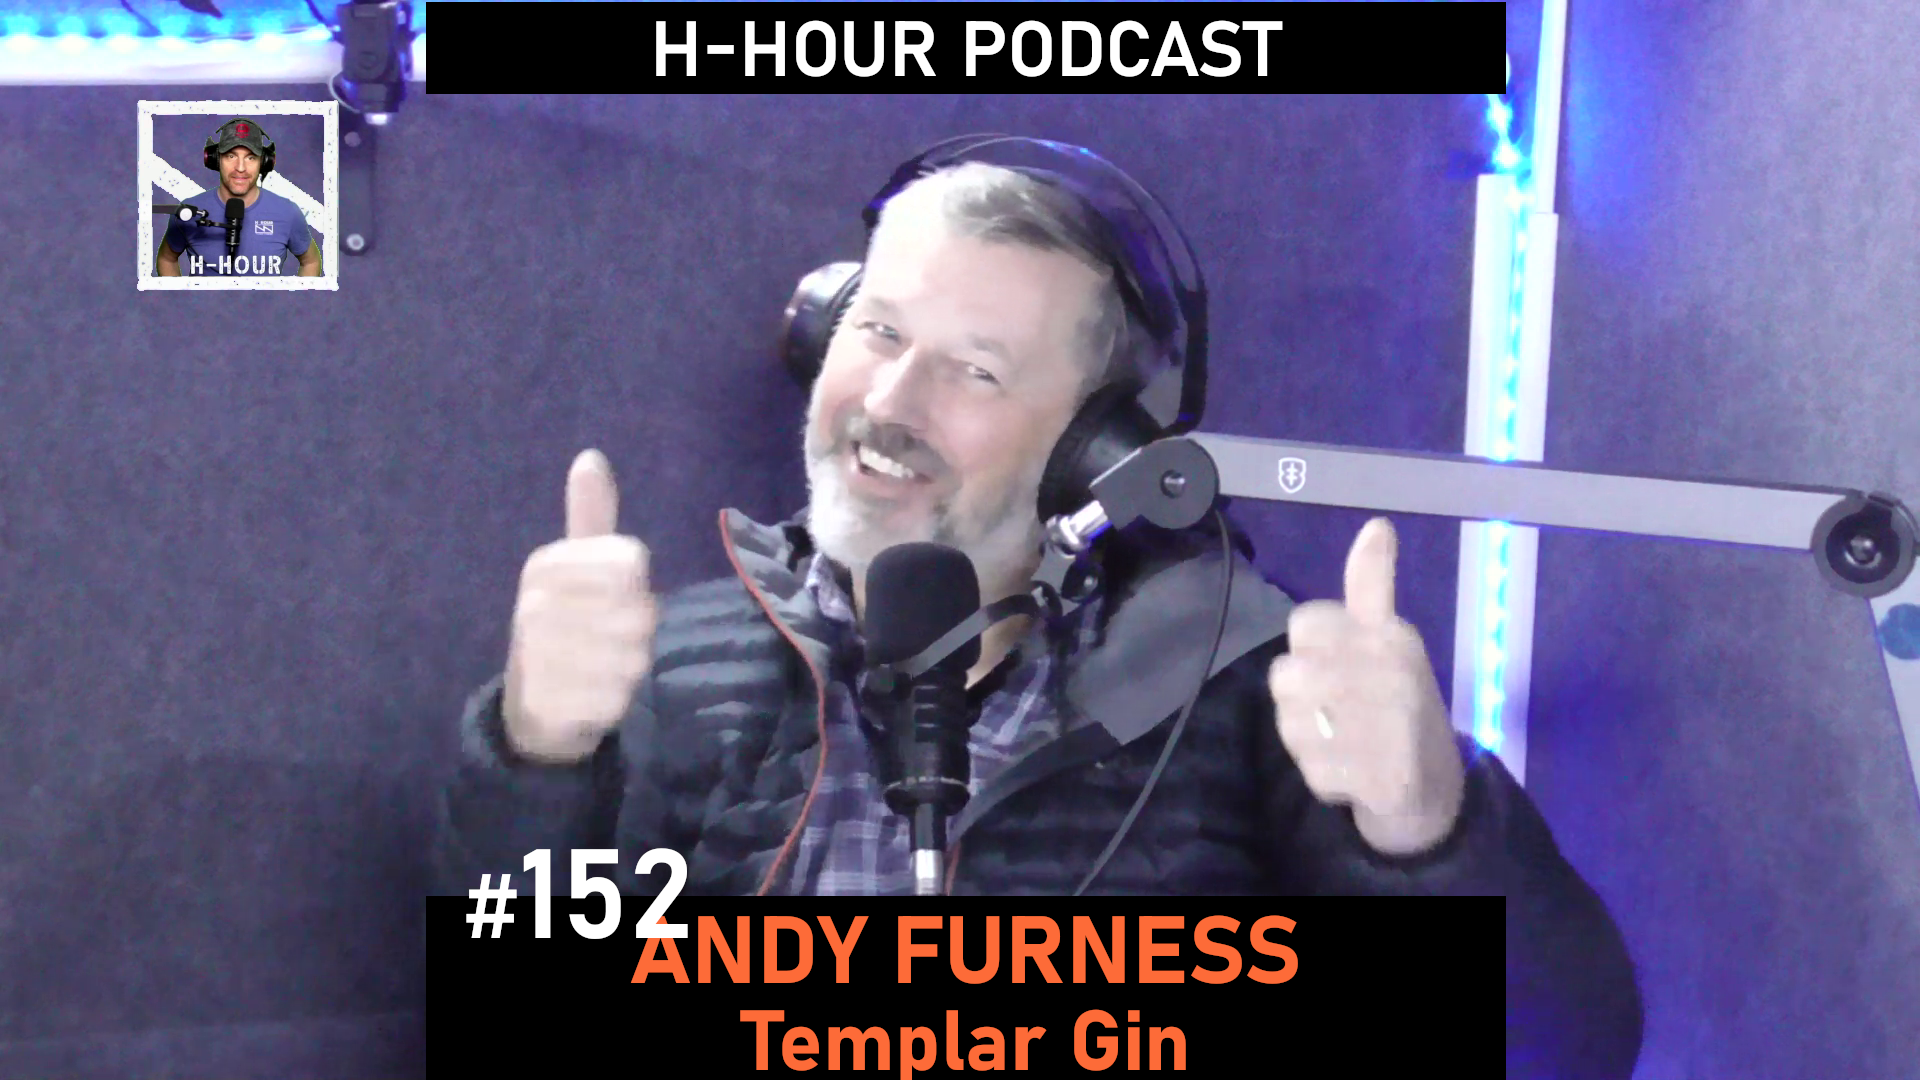 andy furness of templar gin on the h-hour podcast